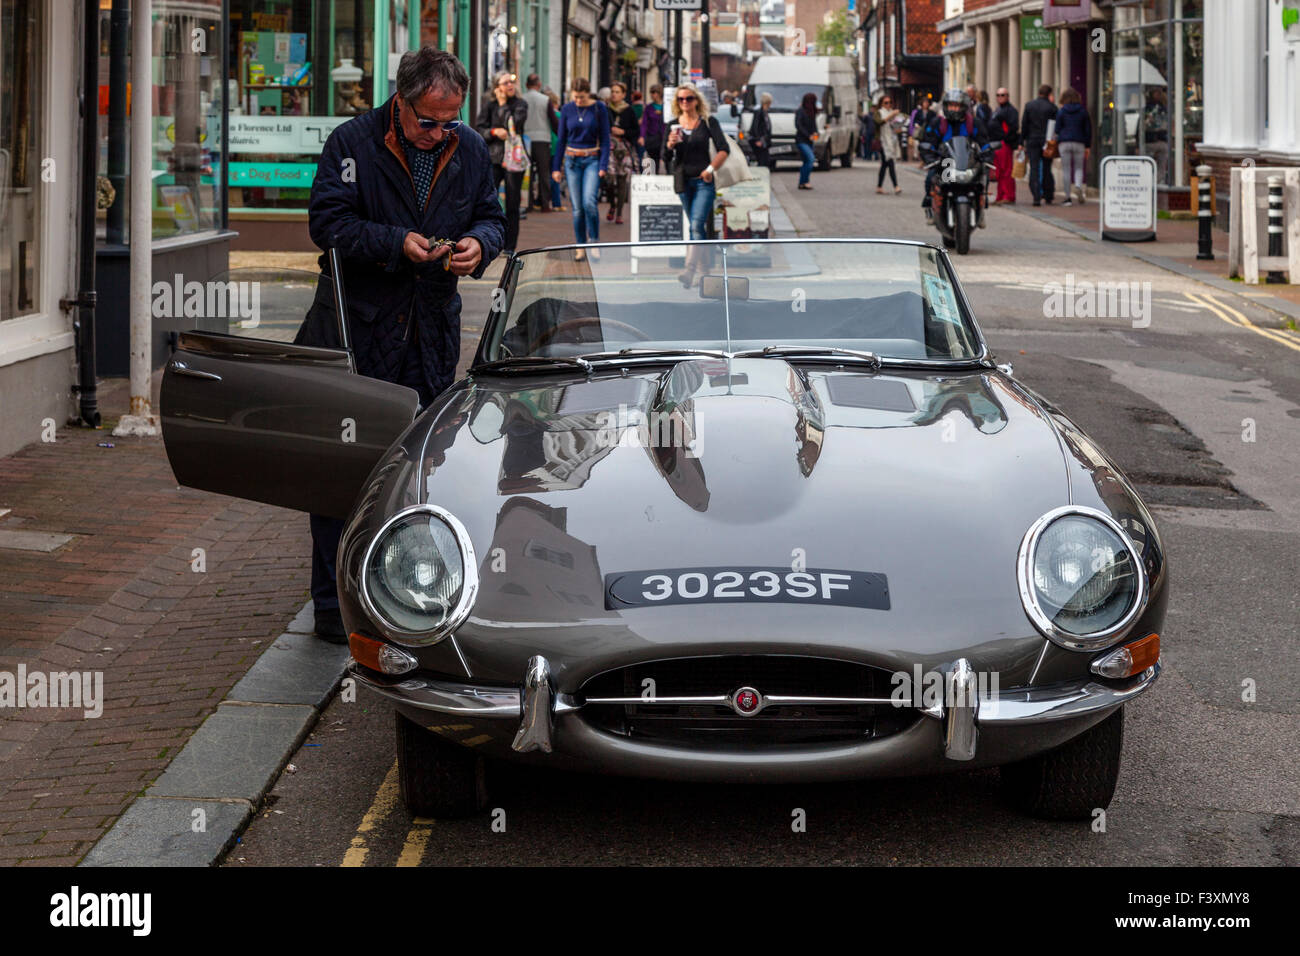 A Man Getting Into His Sports Car, High Street, Lewes, Sussex, UK Stock Photo